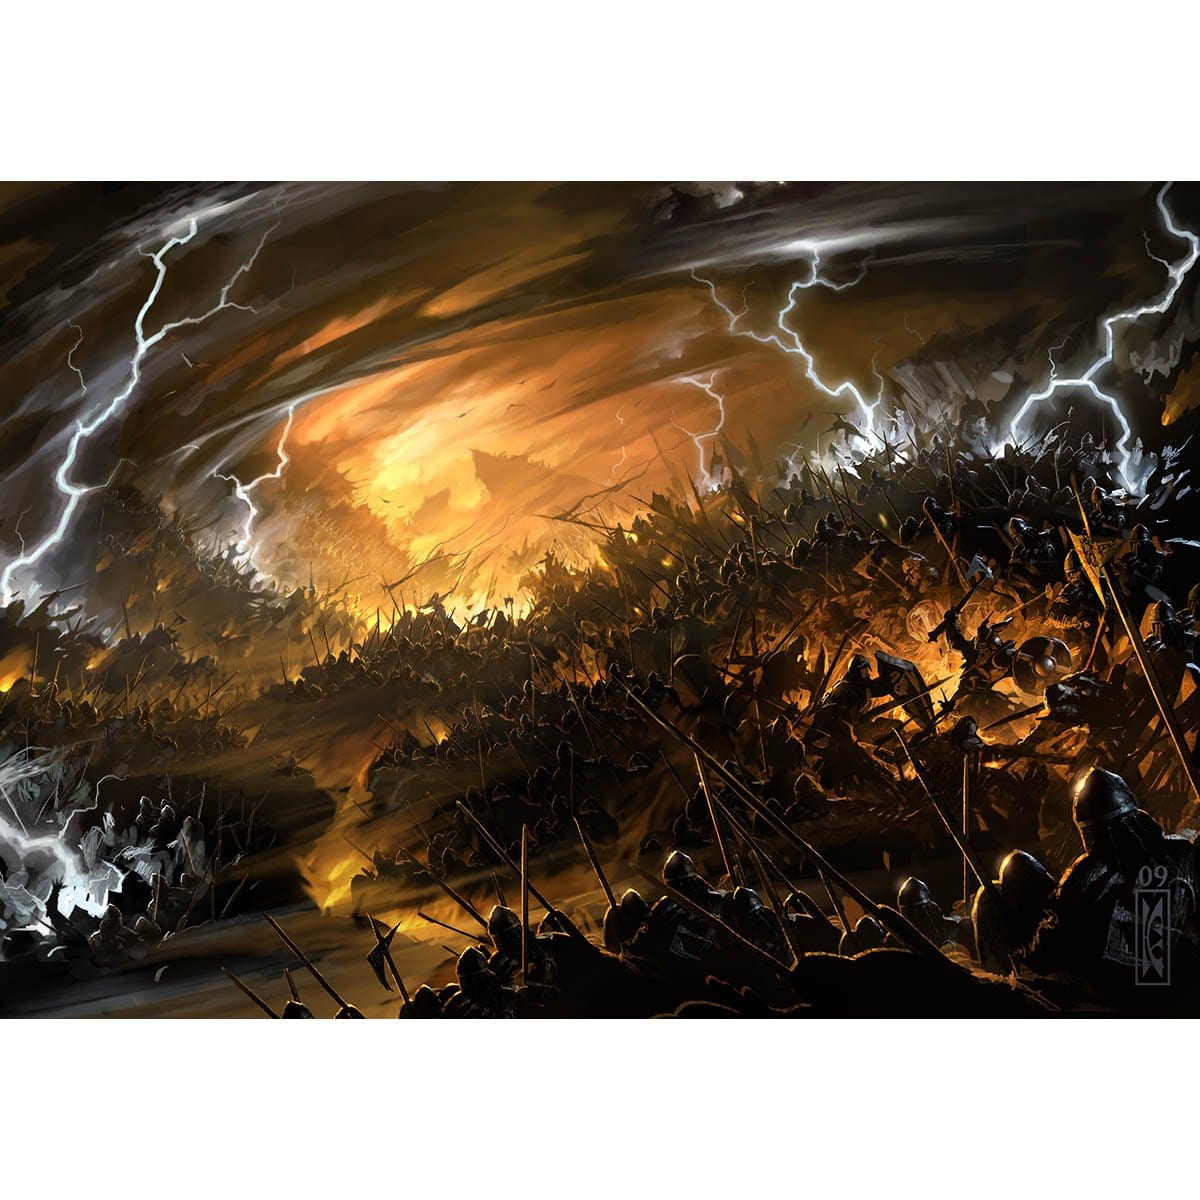 Immersturm Print - Print - Original Magic Art - Accessories for Magic the Gathering and other card games